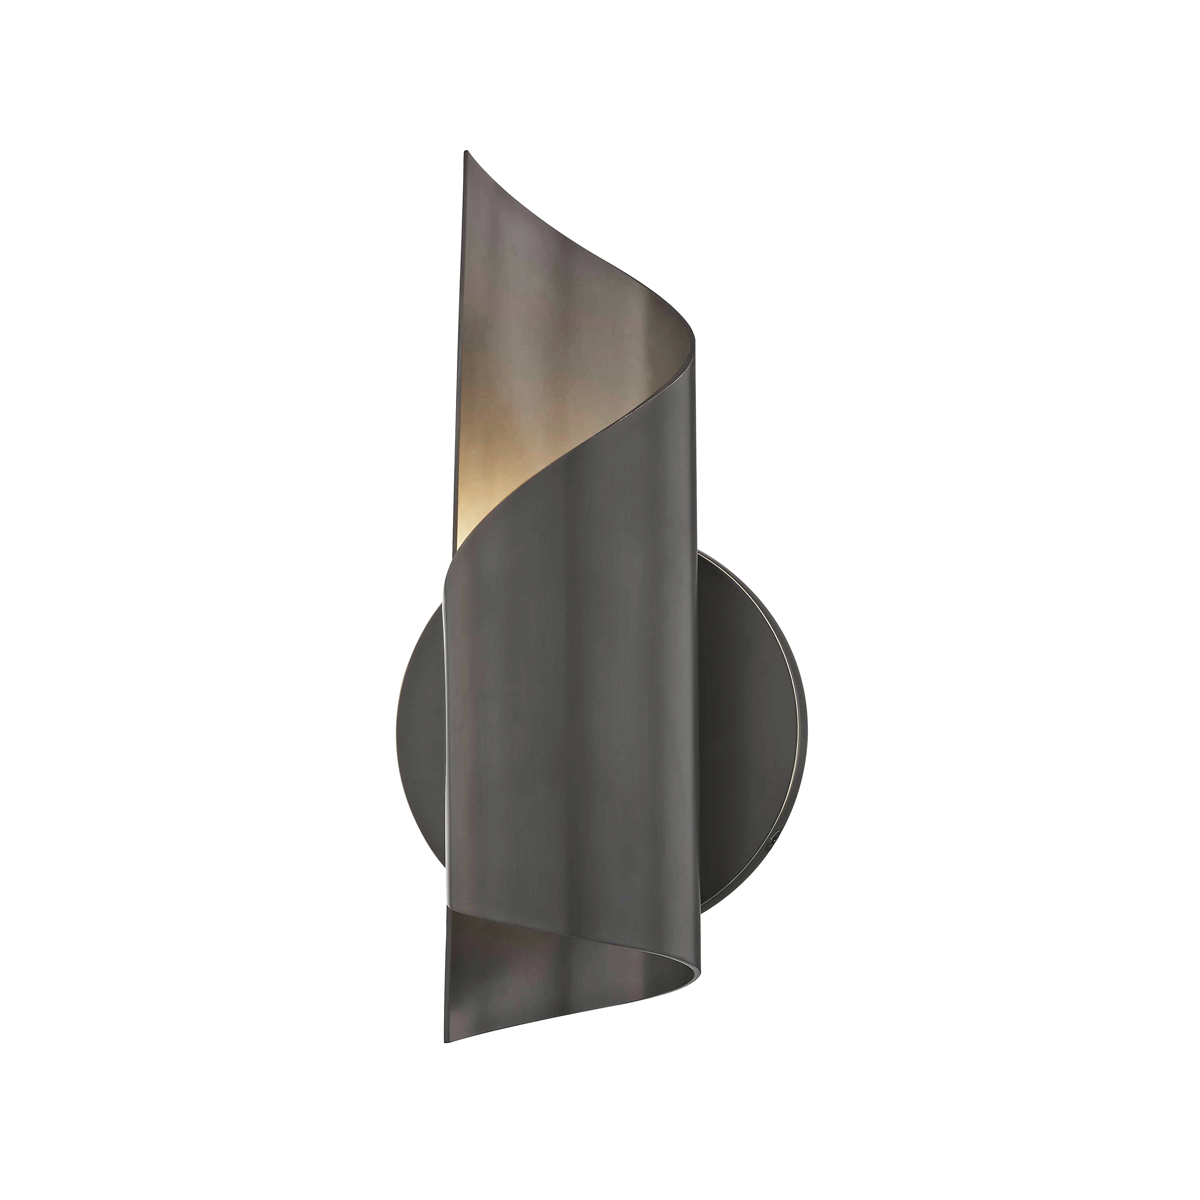 Evie wall sconce - Old bronze